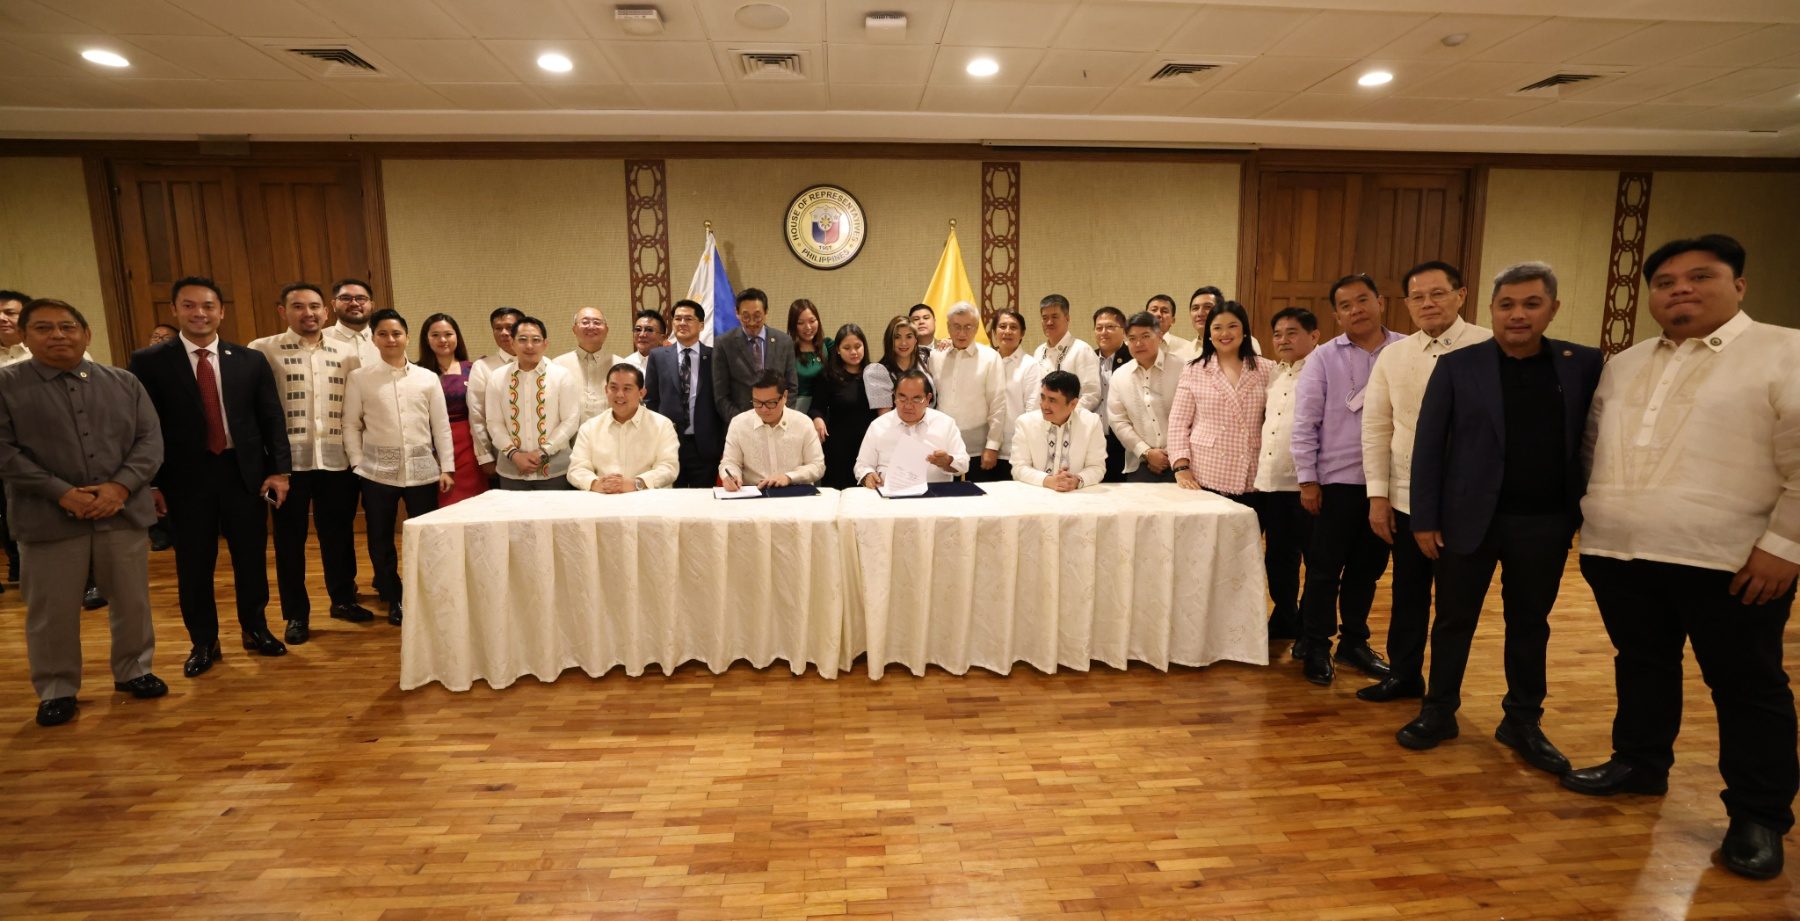 After coup rumors, Lakas-CMD signs ‘alliance agreements’ with House power blocs